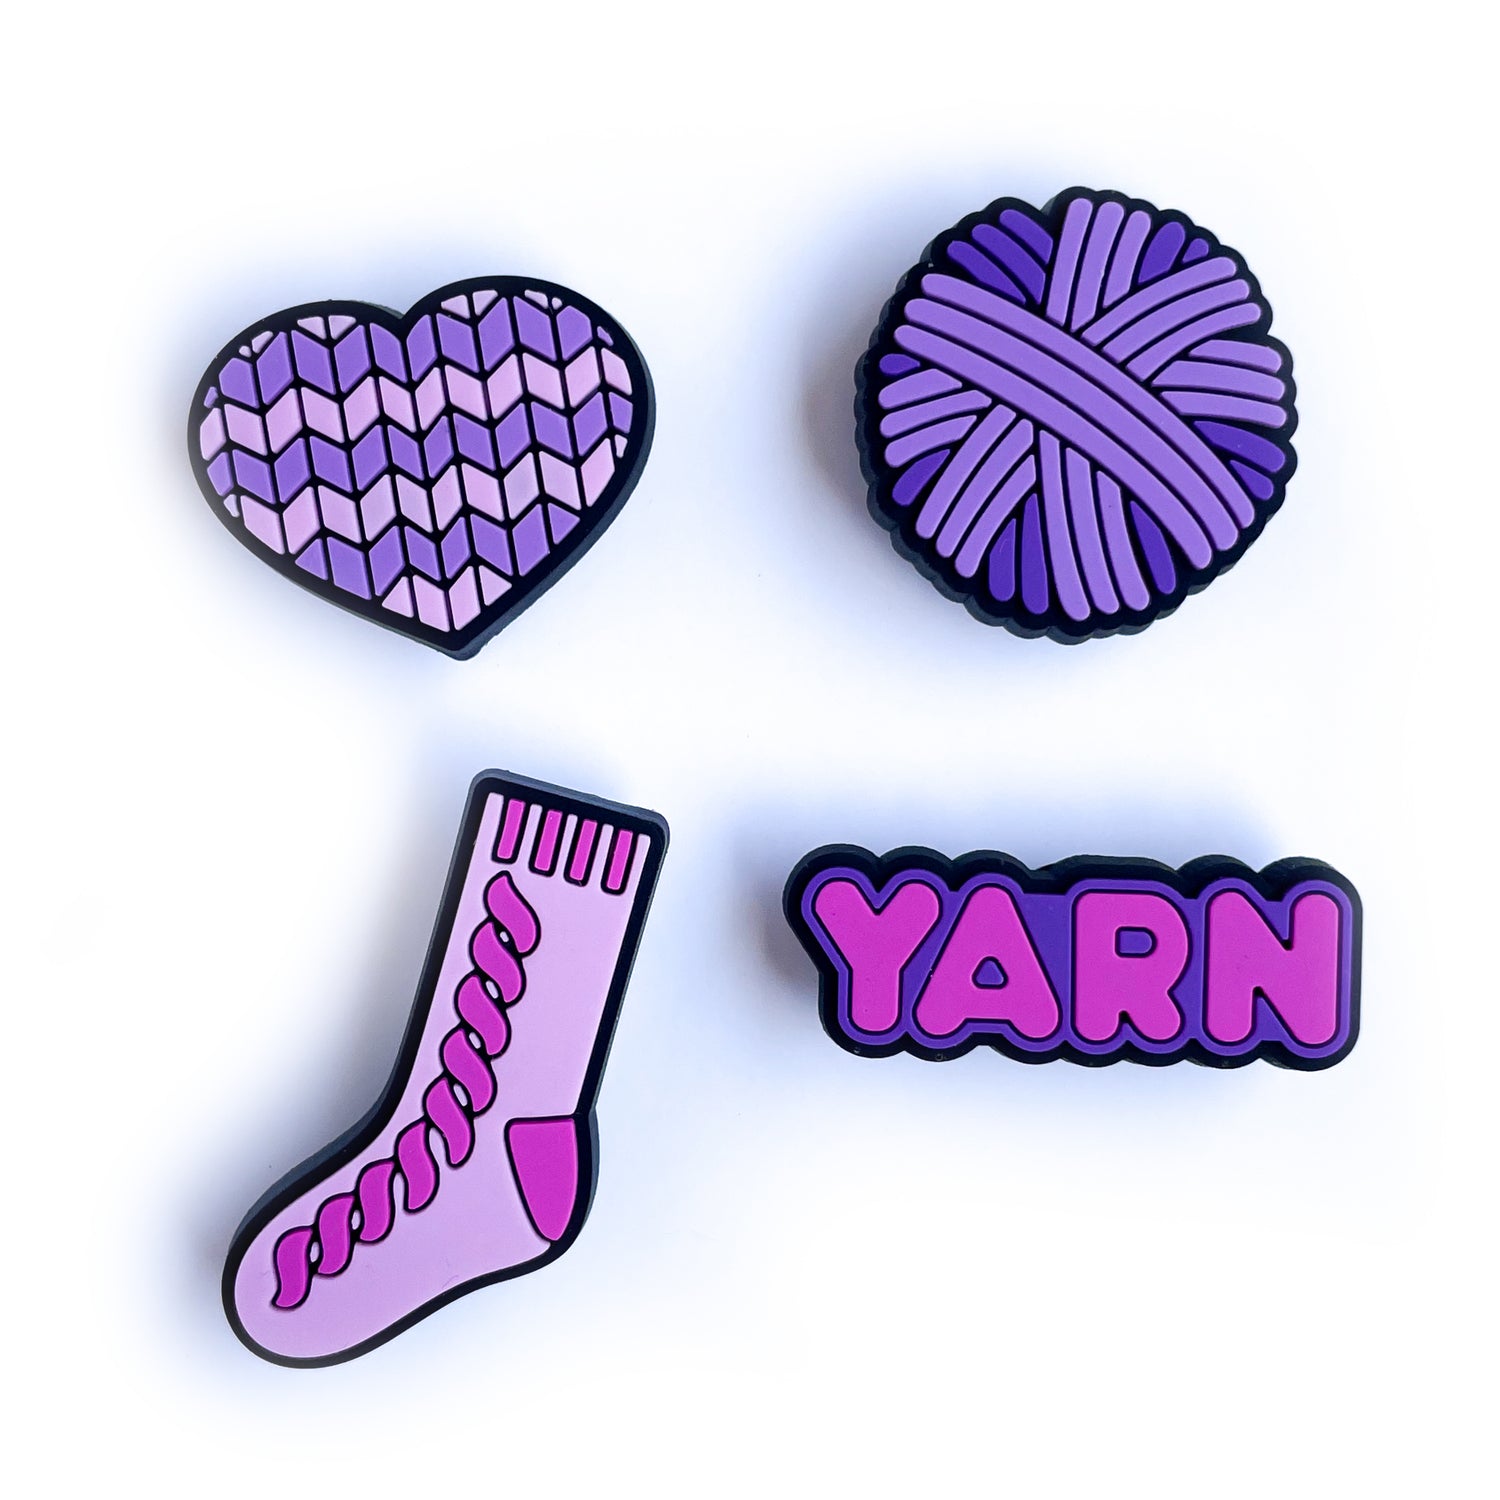 PVC charms shaped like a heart, yarn ball, sock, and the word yarn in shades of pink and purple. 